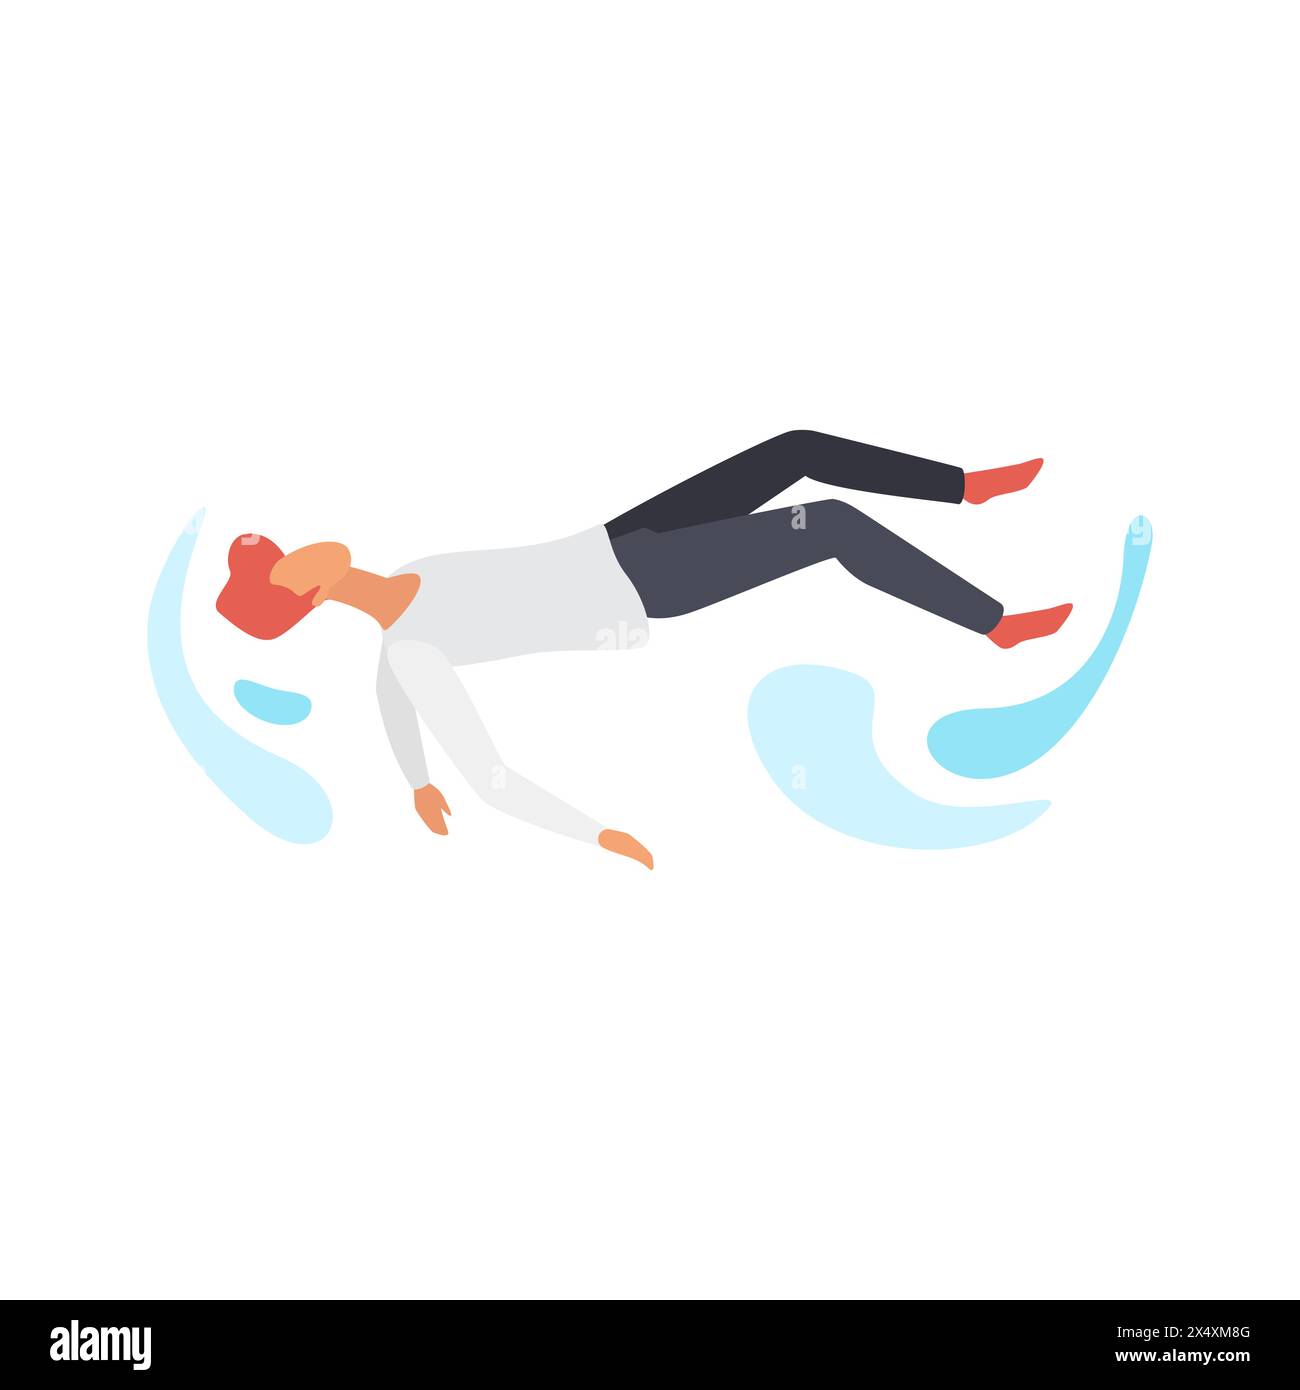 Man flying in air flow, action of male character falling in sky vector illustration Stock Vector